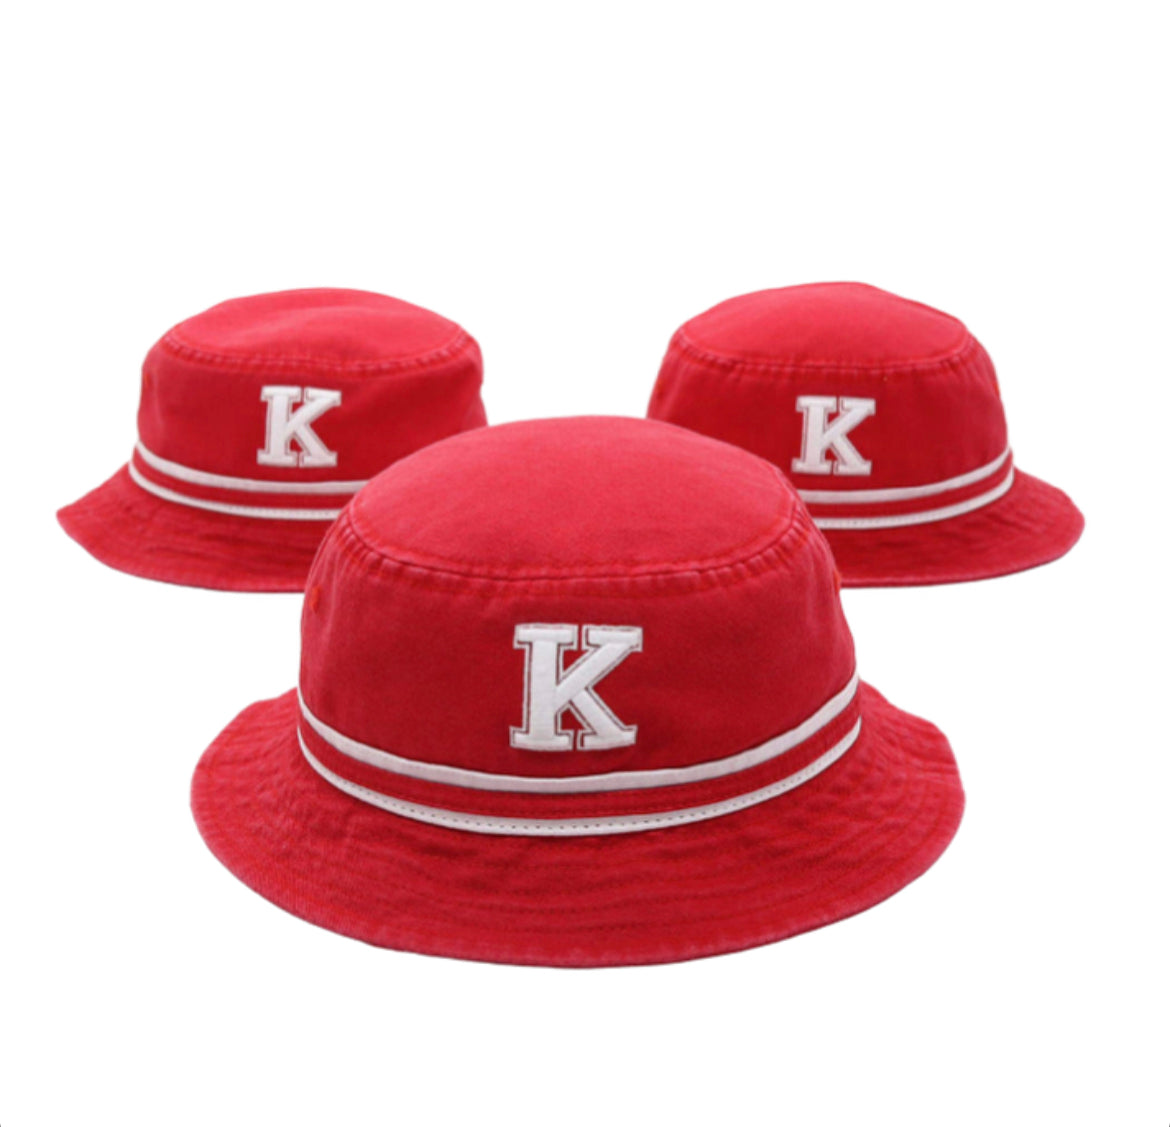 Get ready to show off your Kappa Alpha Psi pride with this stylish "Big K" bucket hat. Perfect for any Fraternity event, this hat is made for the ultimate Kappa Alpha Psi member. Representing the Fraternal Organization with style, this collectible item is a must-have for any true member of the fraternity .